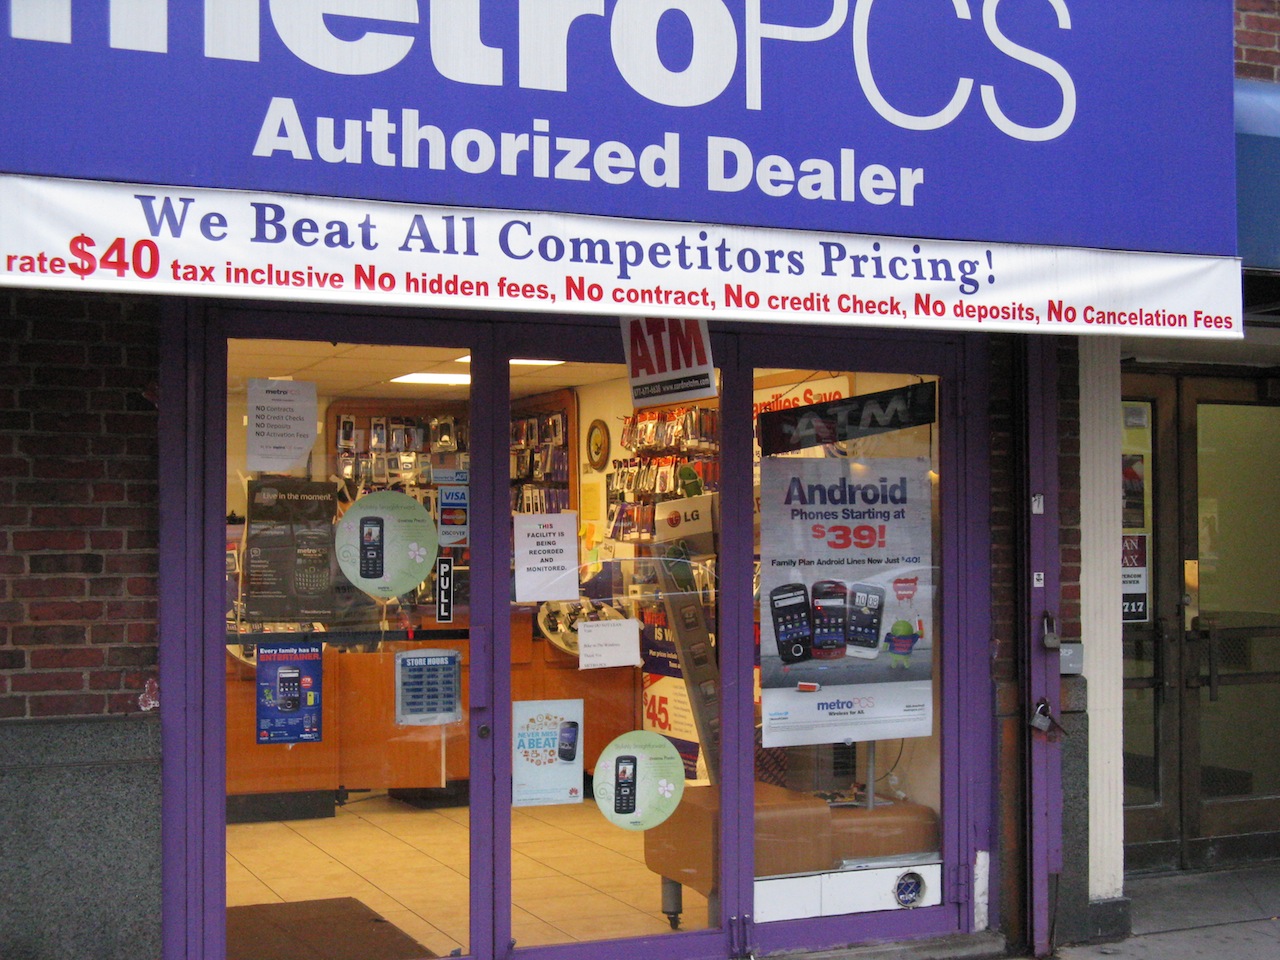 EV Grieve: Armed men robbed the Metro PCS store on East 14th Street twice  last month: cops